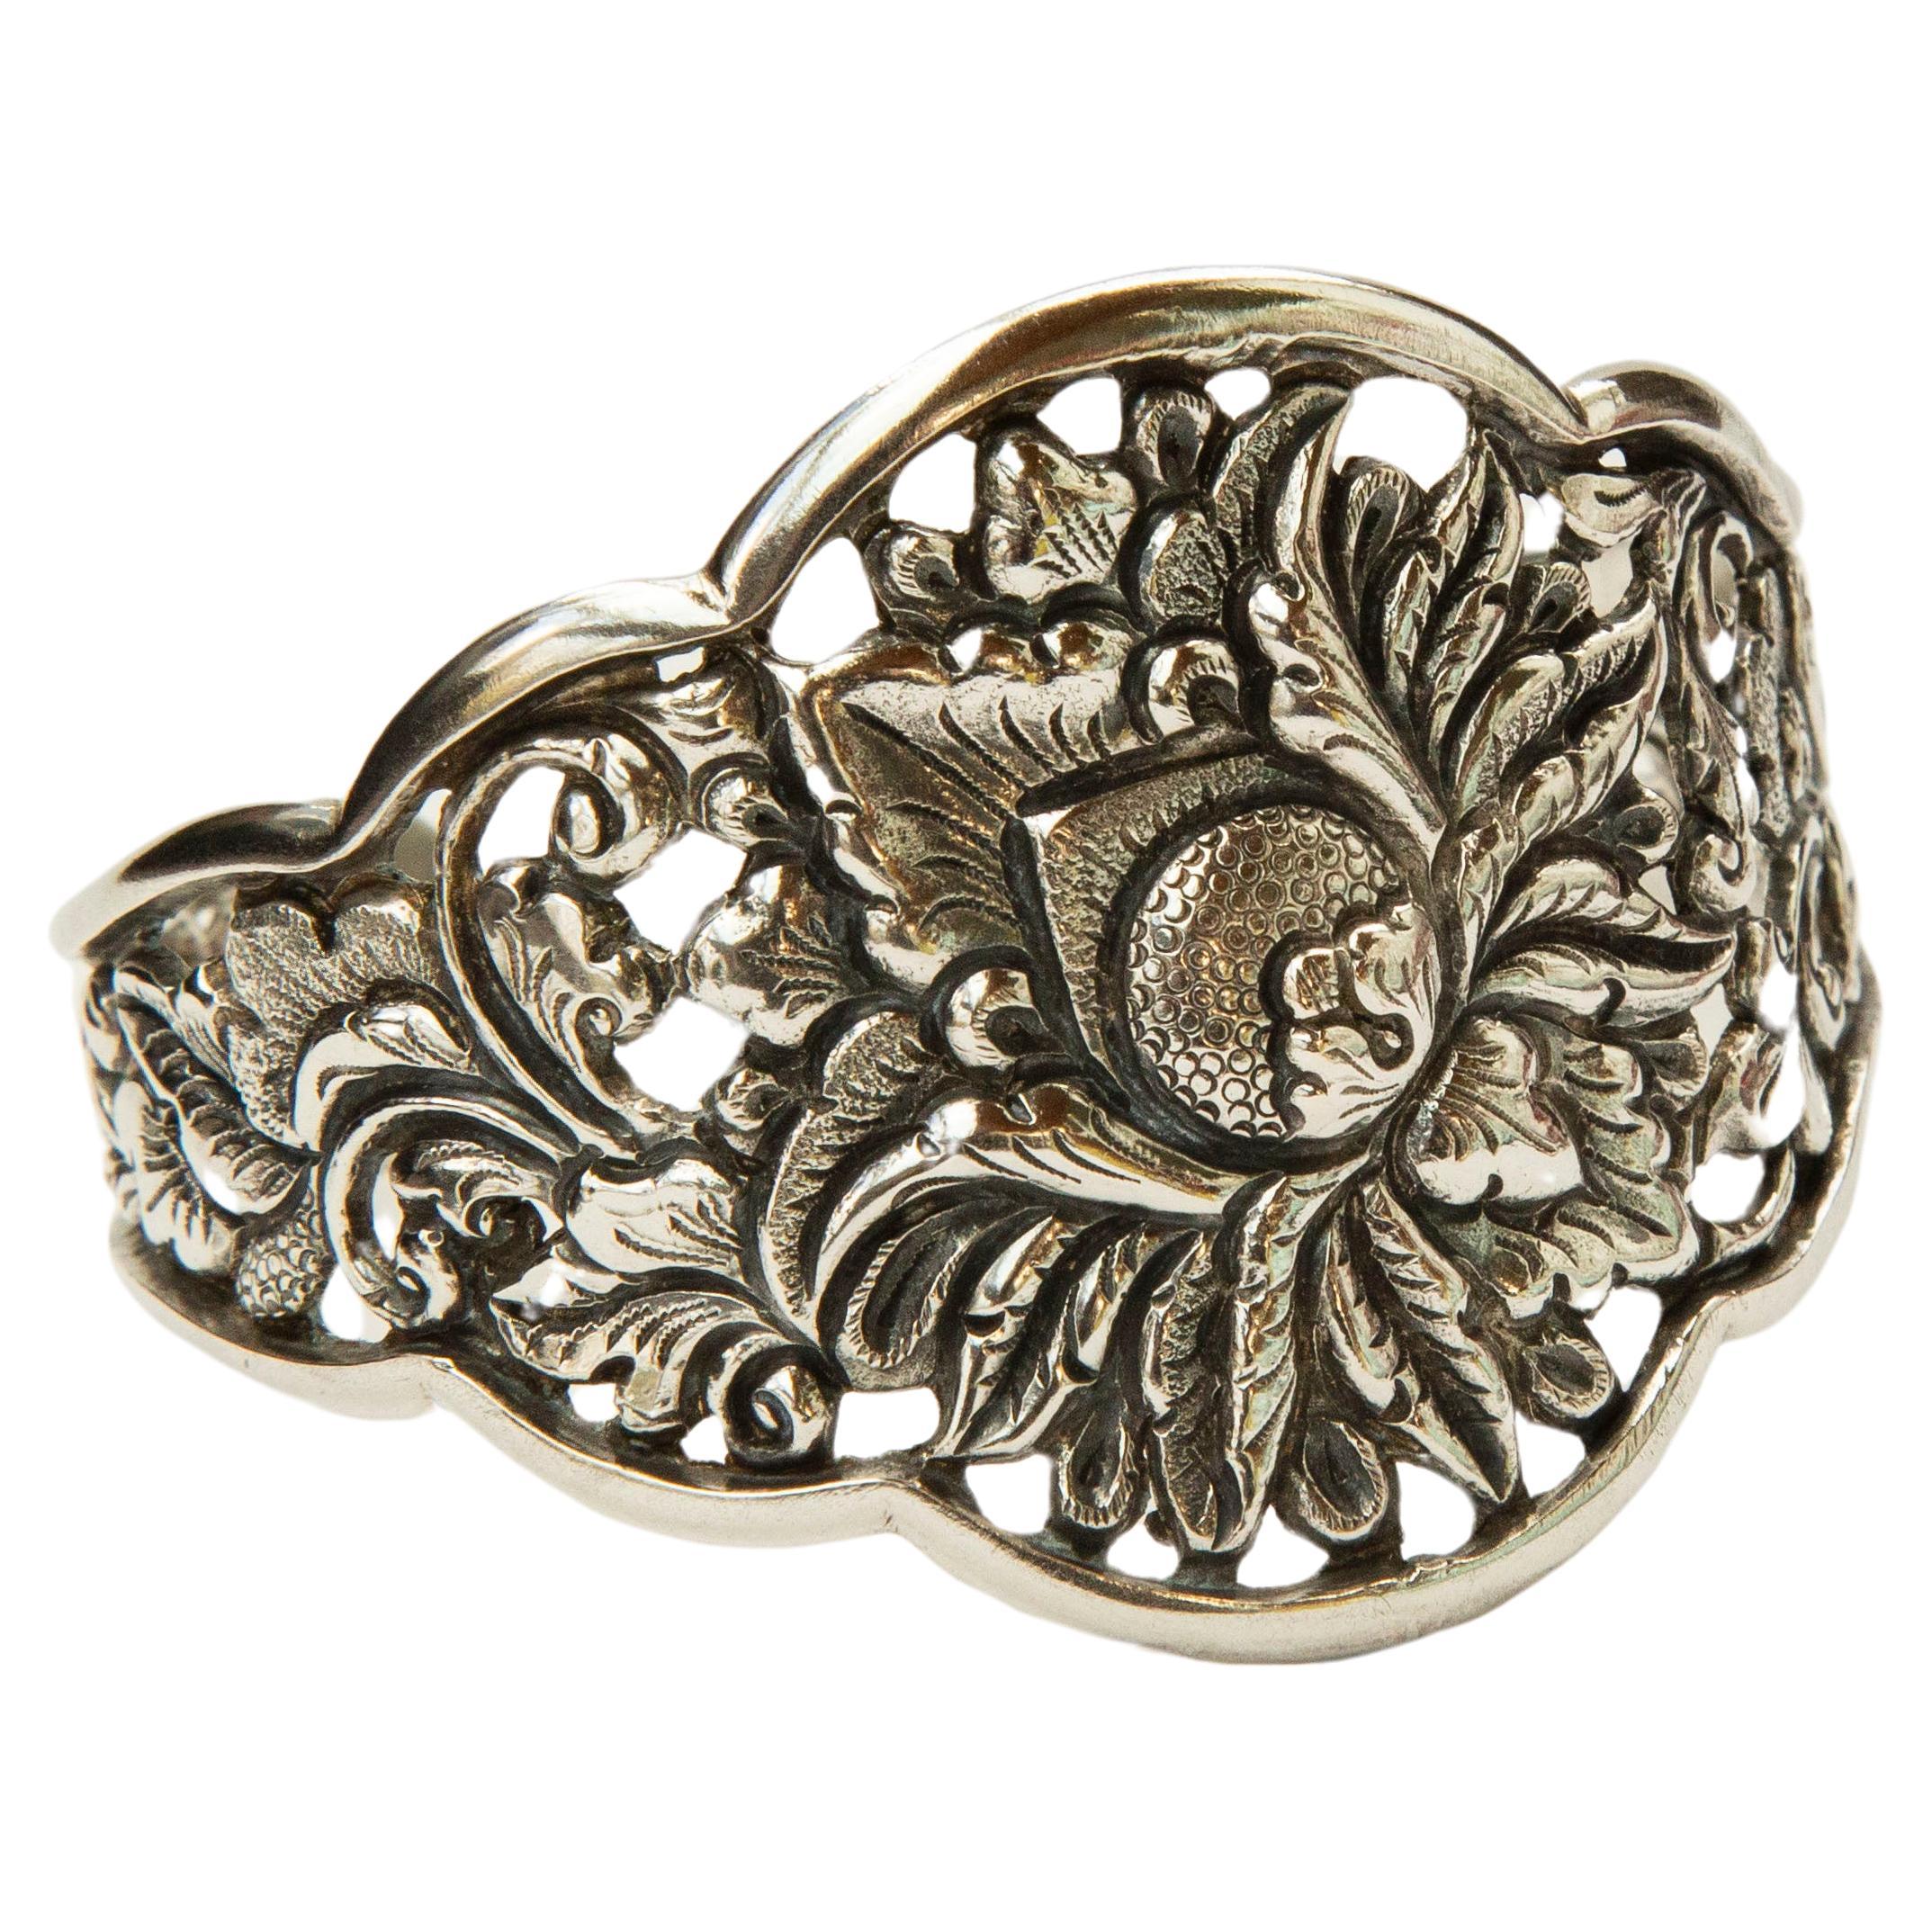 Vintage Indonesian Silver 800 Cuff Bracelet with Floral Decor CA. 1930s For Sale